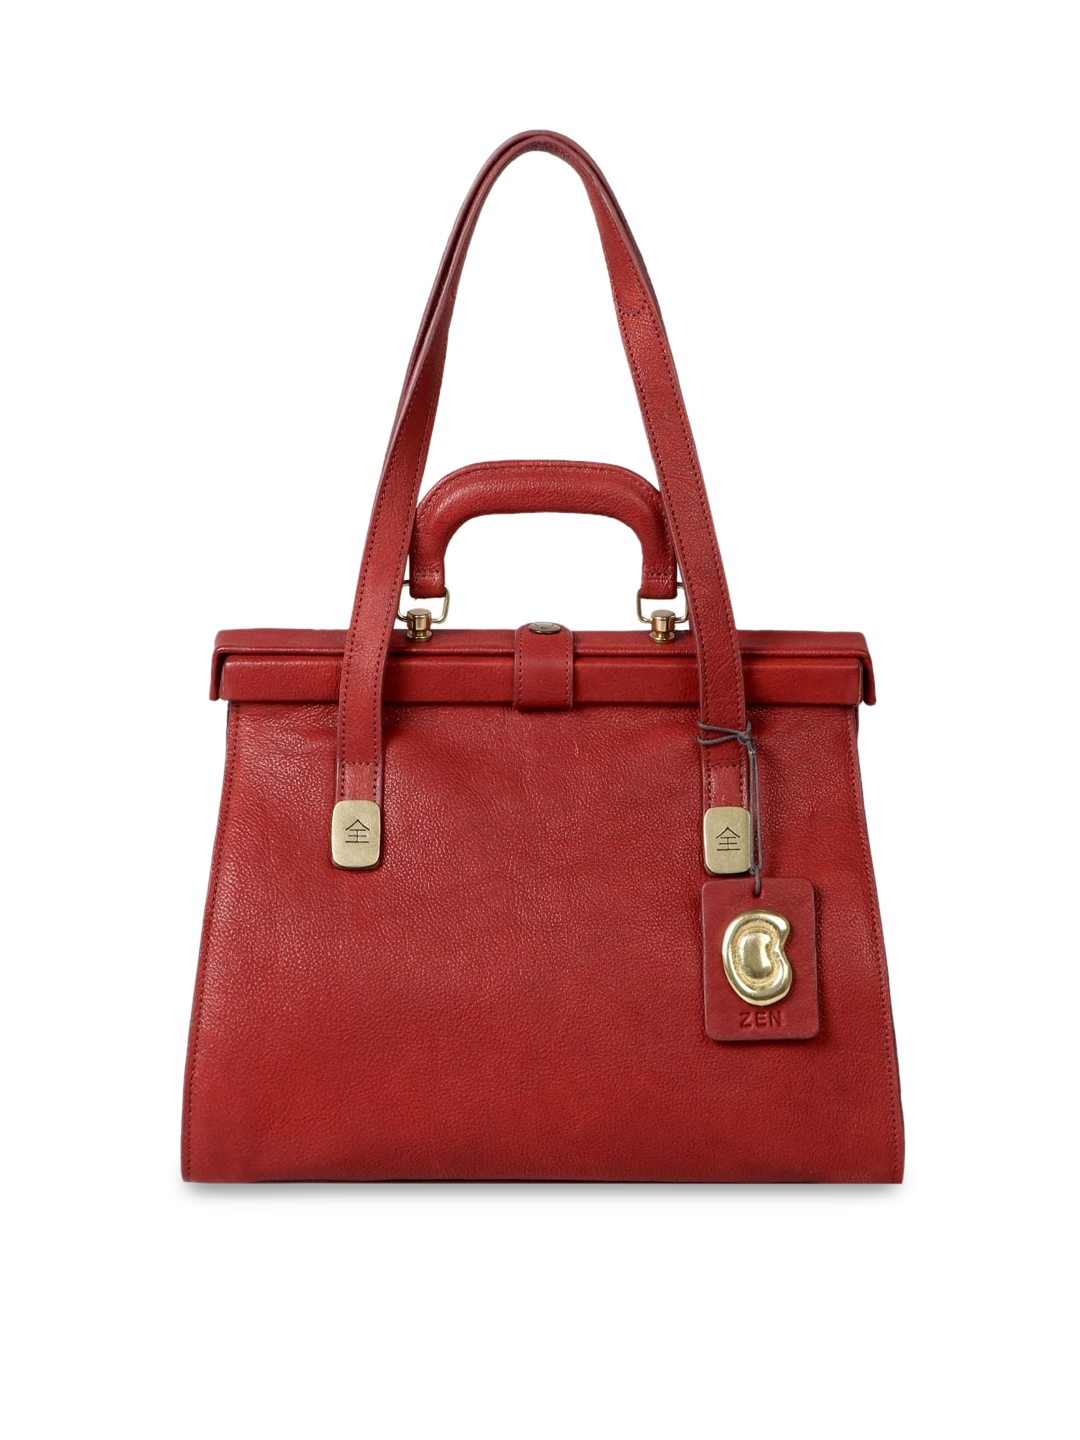 Buy Hidesign Red Leather Structured Handheld Bag - Handbags for Women ...